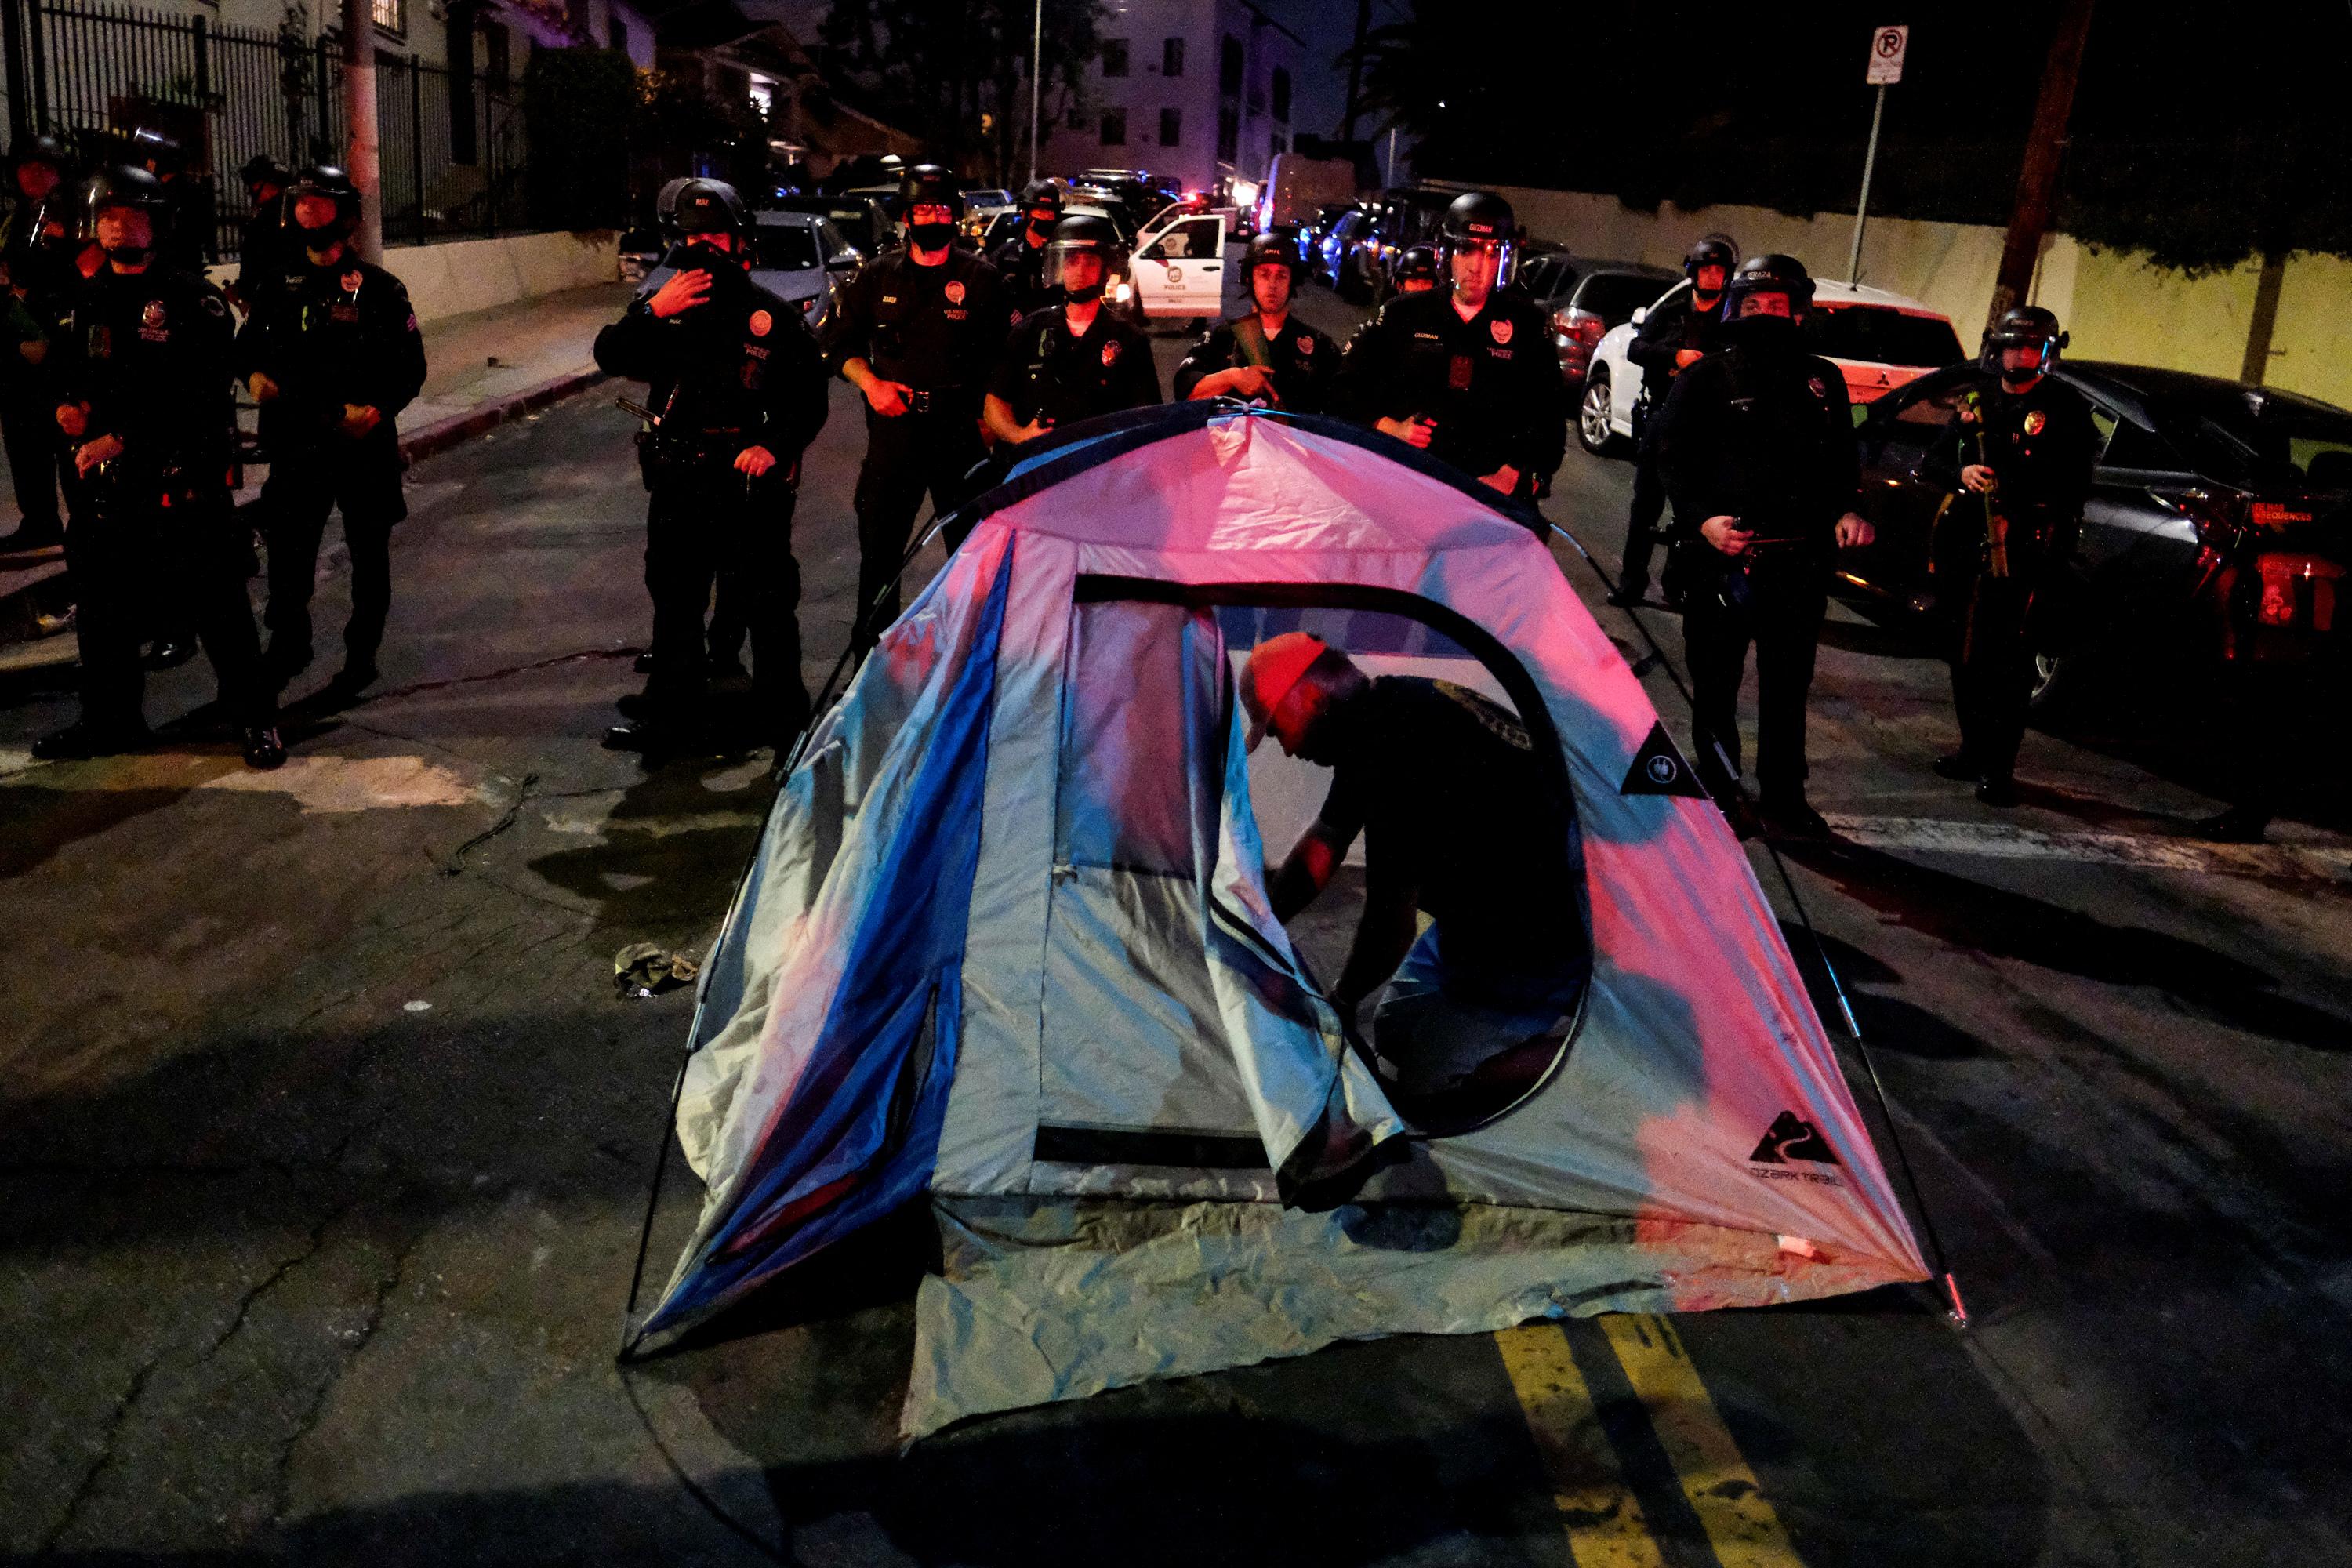 A man sets up a tent in the road in front of a line of police at night.